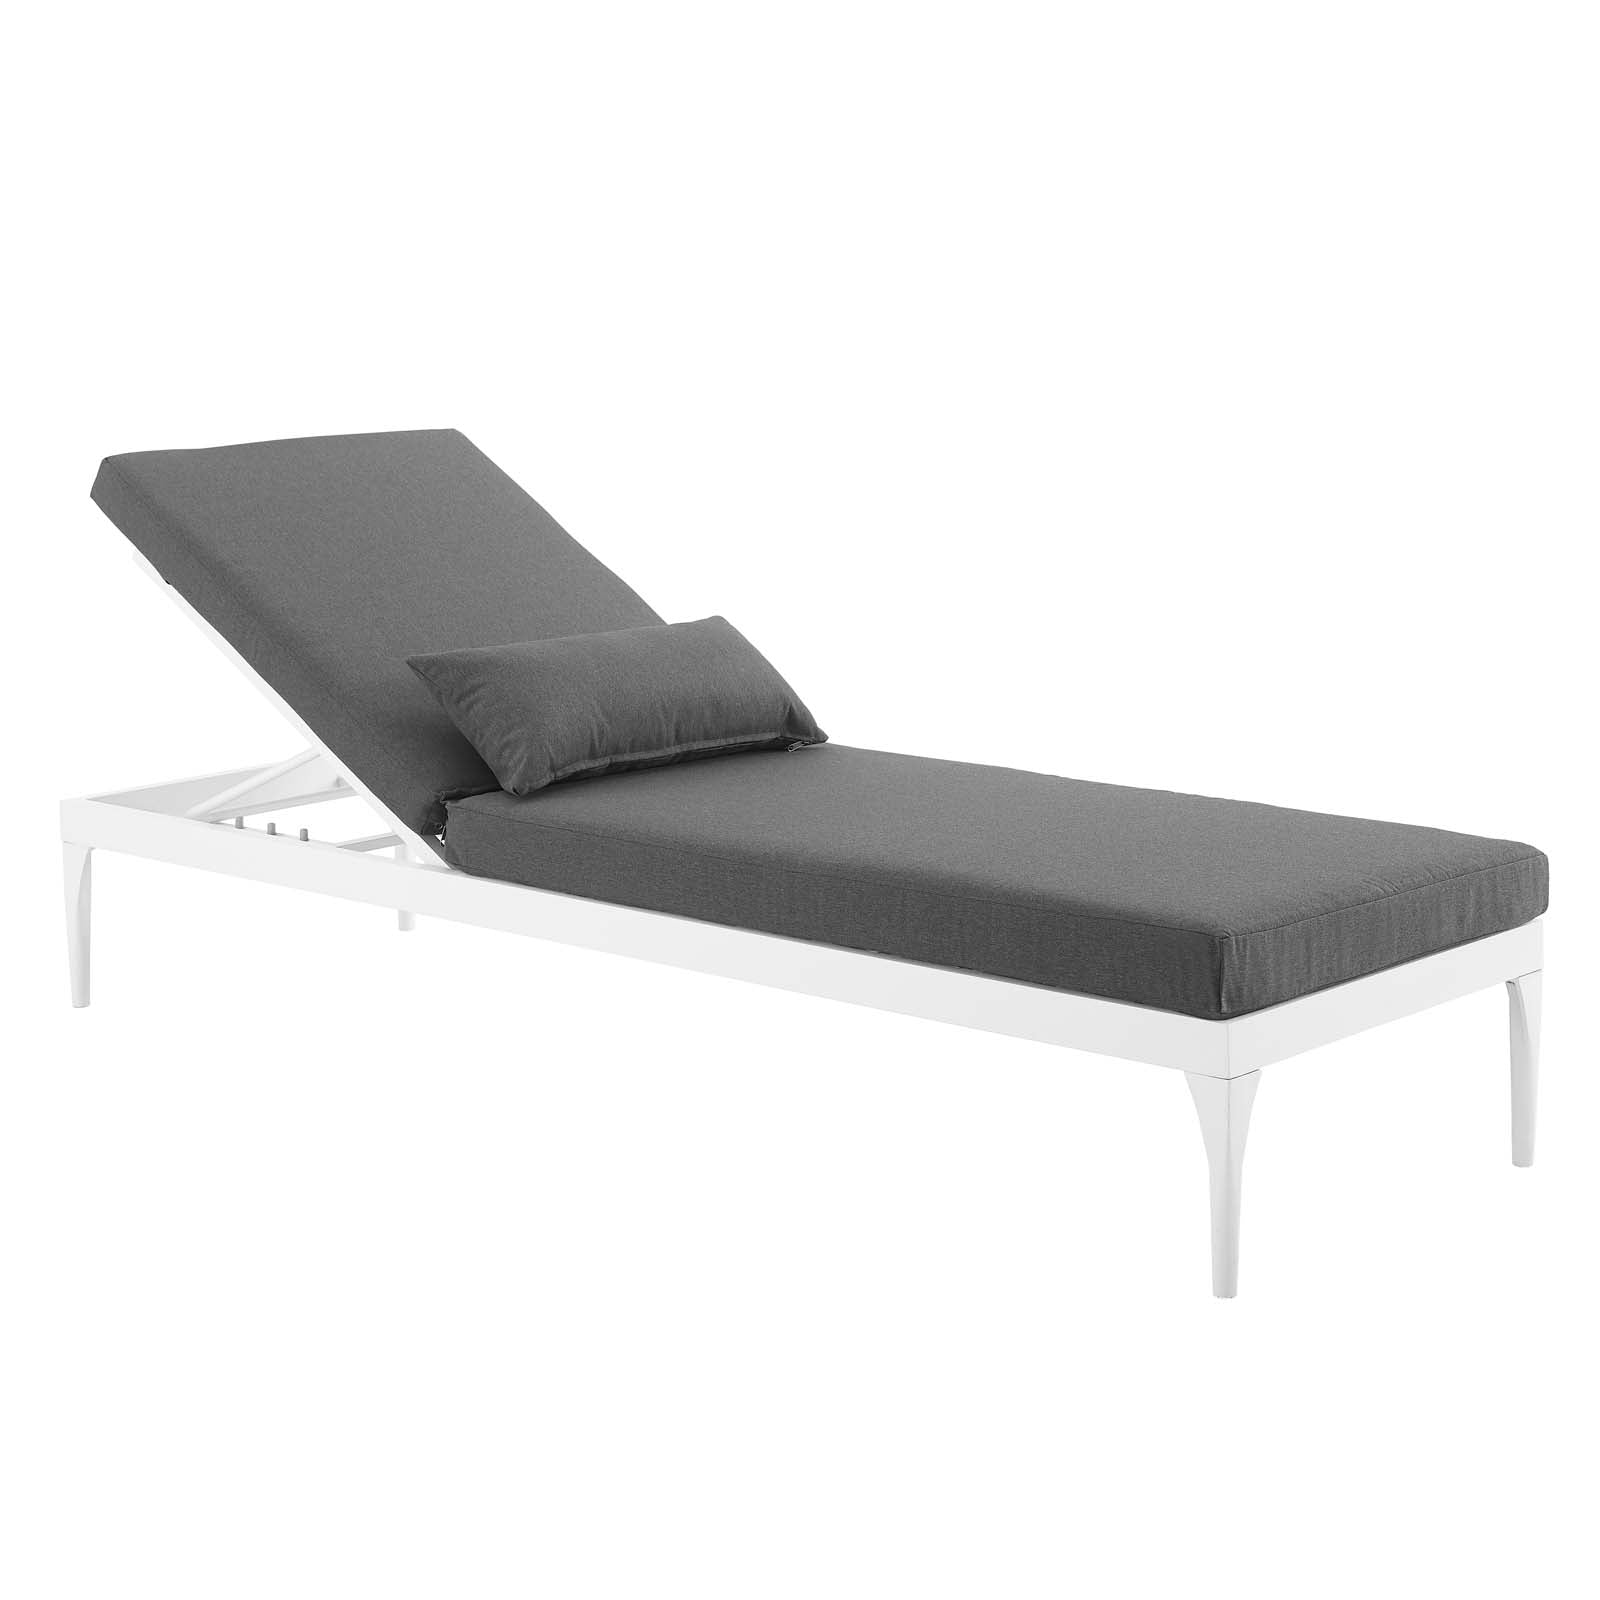 Modway Outdoor Loungers - Perspective Cushion Outdoor Chaise Lounge Chair White & Charcoal